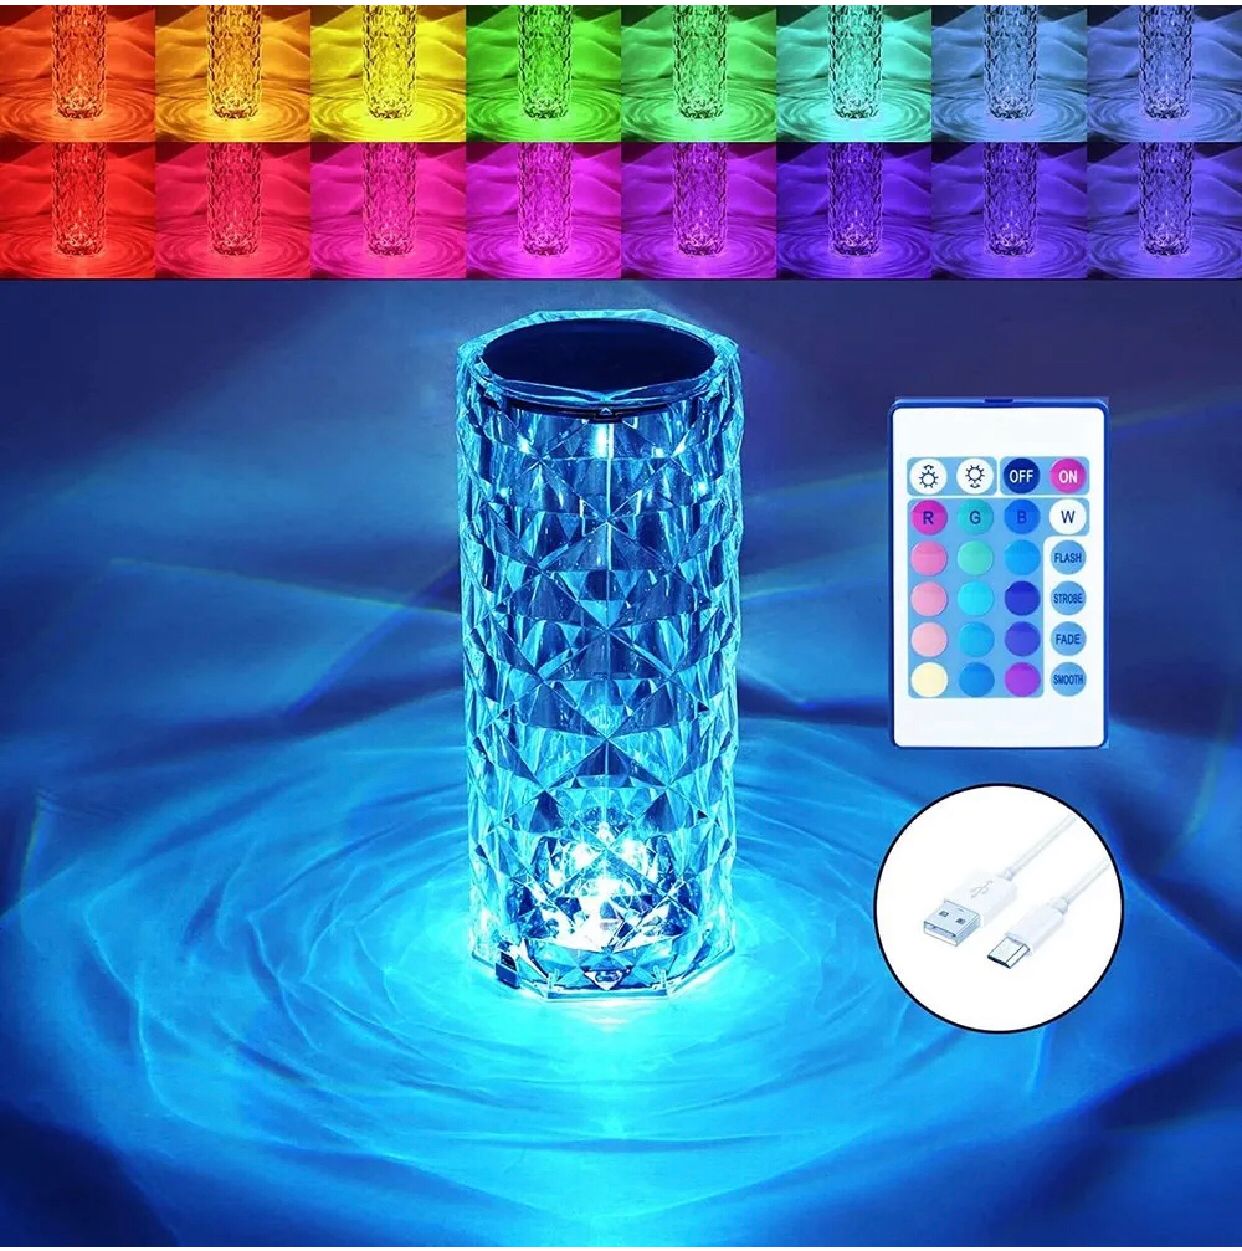 16 Colors LED Atmosphere Room Decor Christmas Room Decoration Home Lights Crystal Lamp Touch Table Bedside Lamps Light